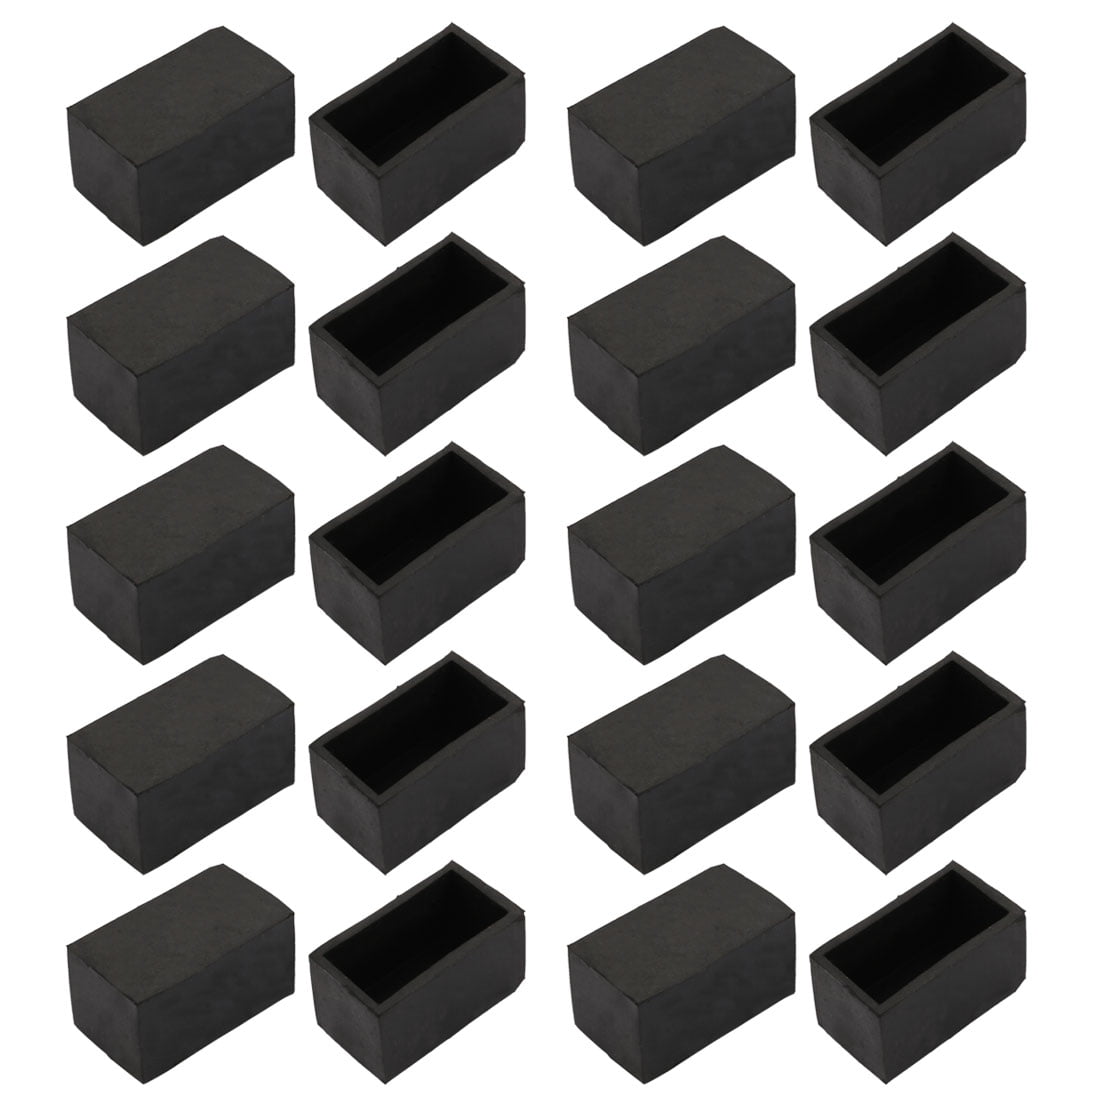 20pcs Furniture Desk Chair Protector 20mmx40mm Square Rubber Leg Tip ...